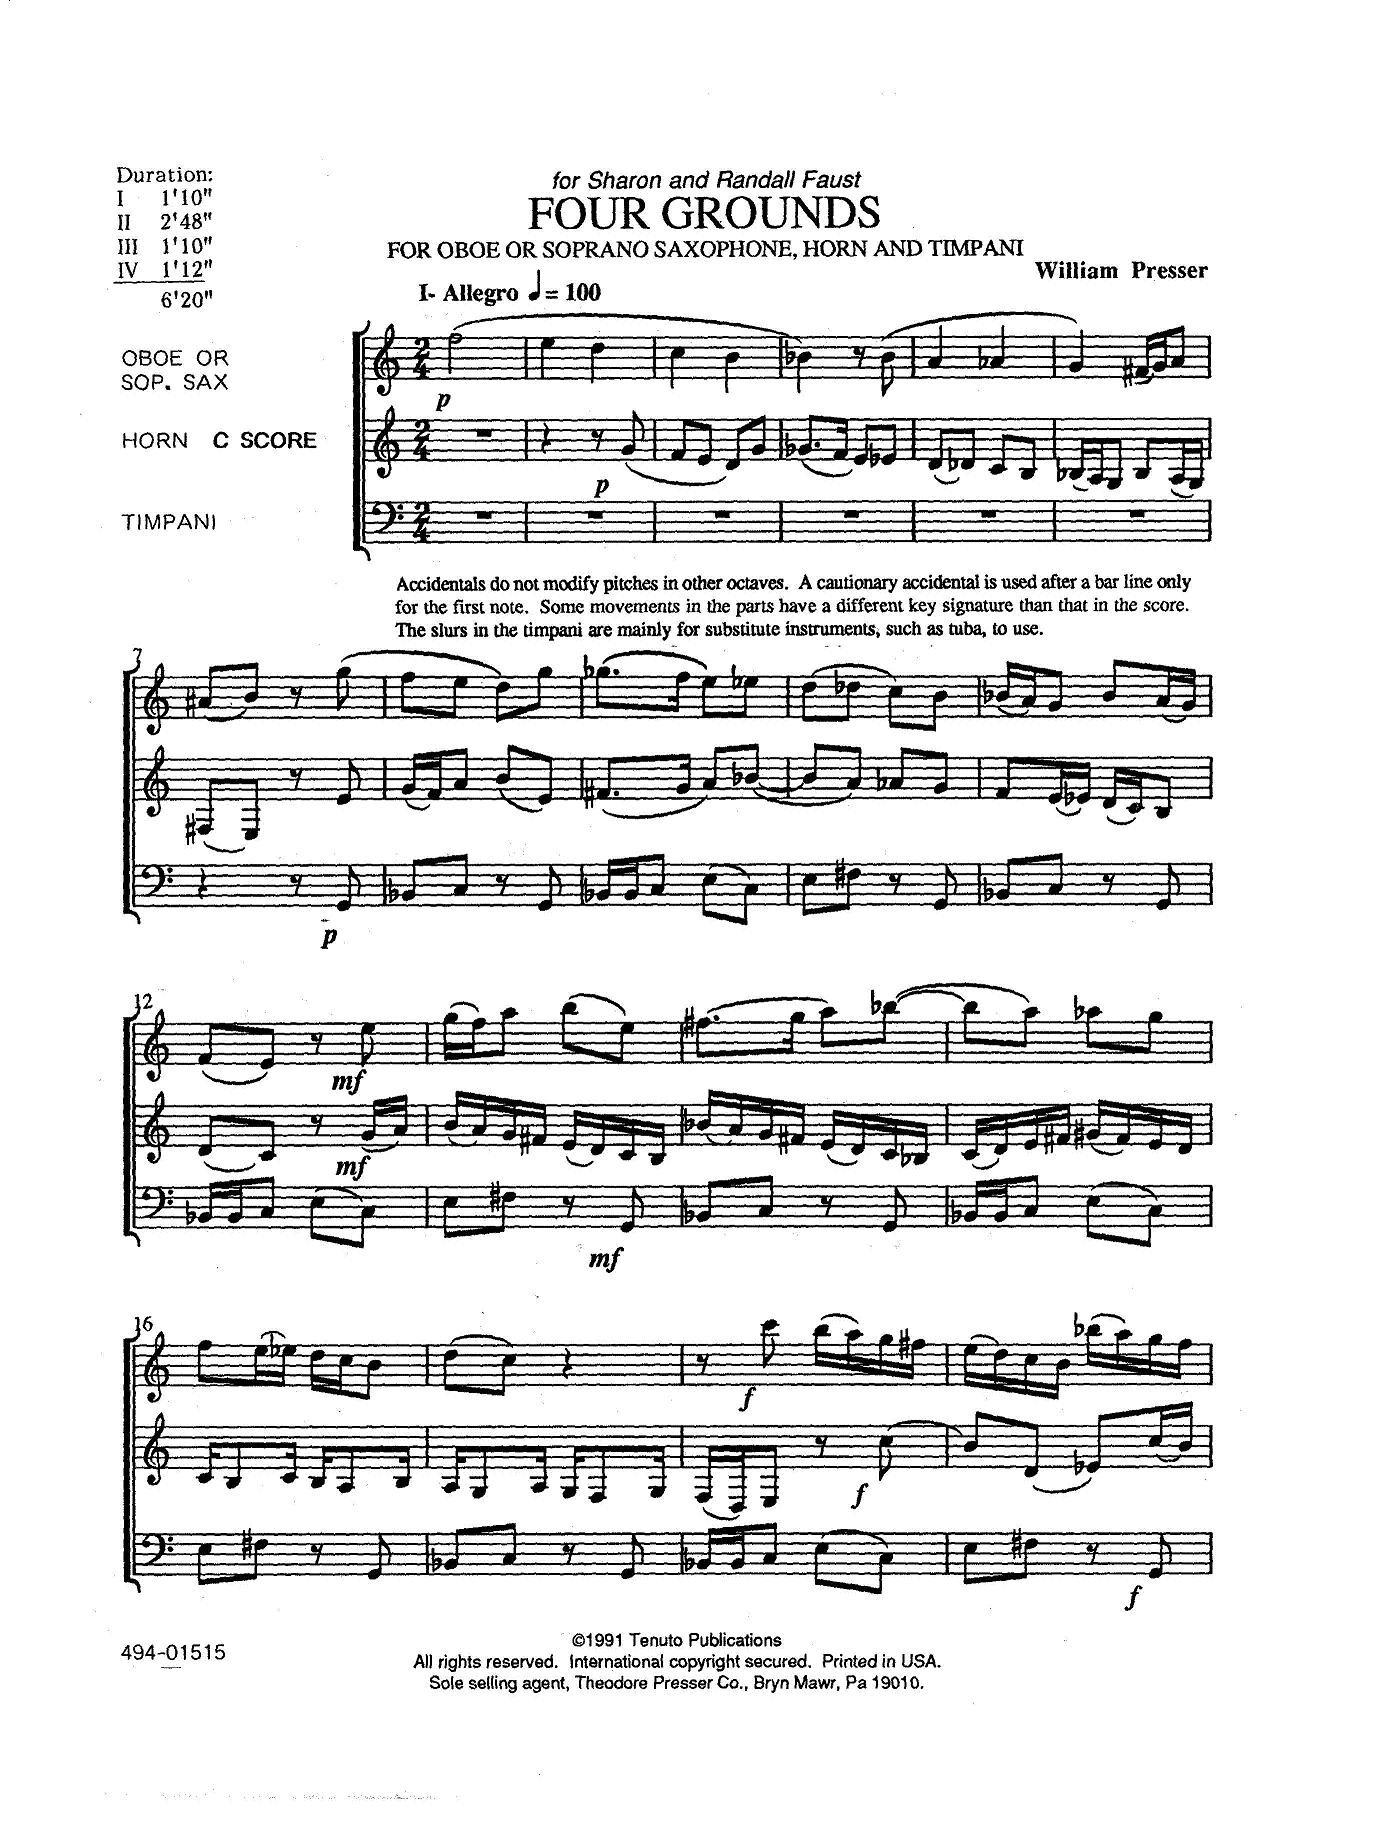 Four Grounds for Oboe or Soprano Saxophone, Horn and Timpani by William Presser